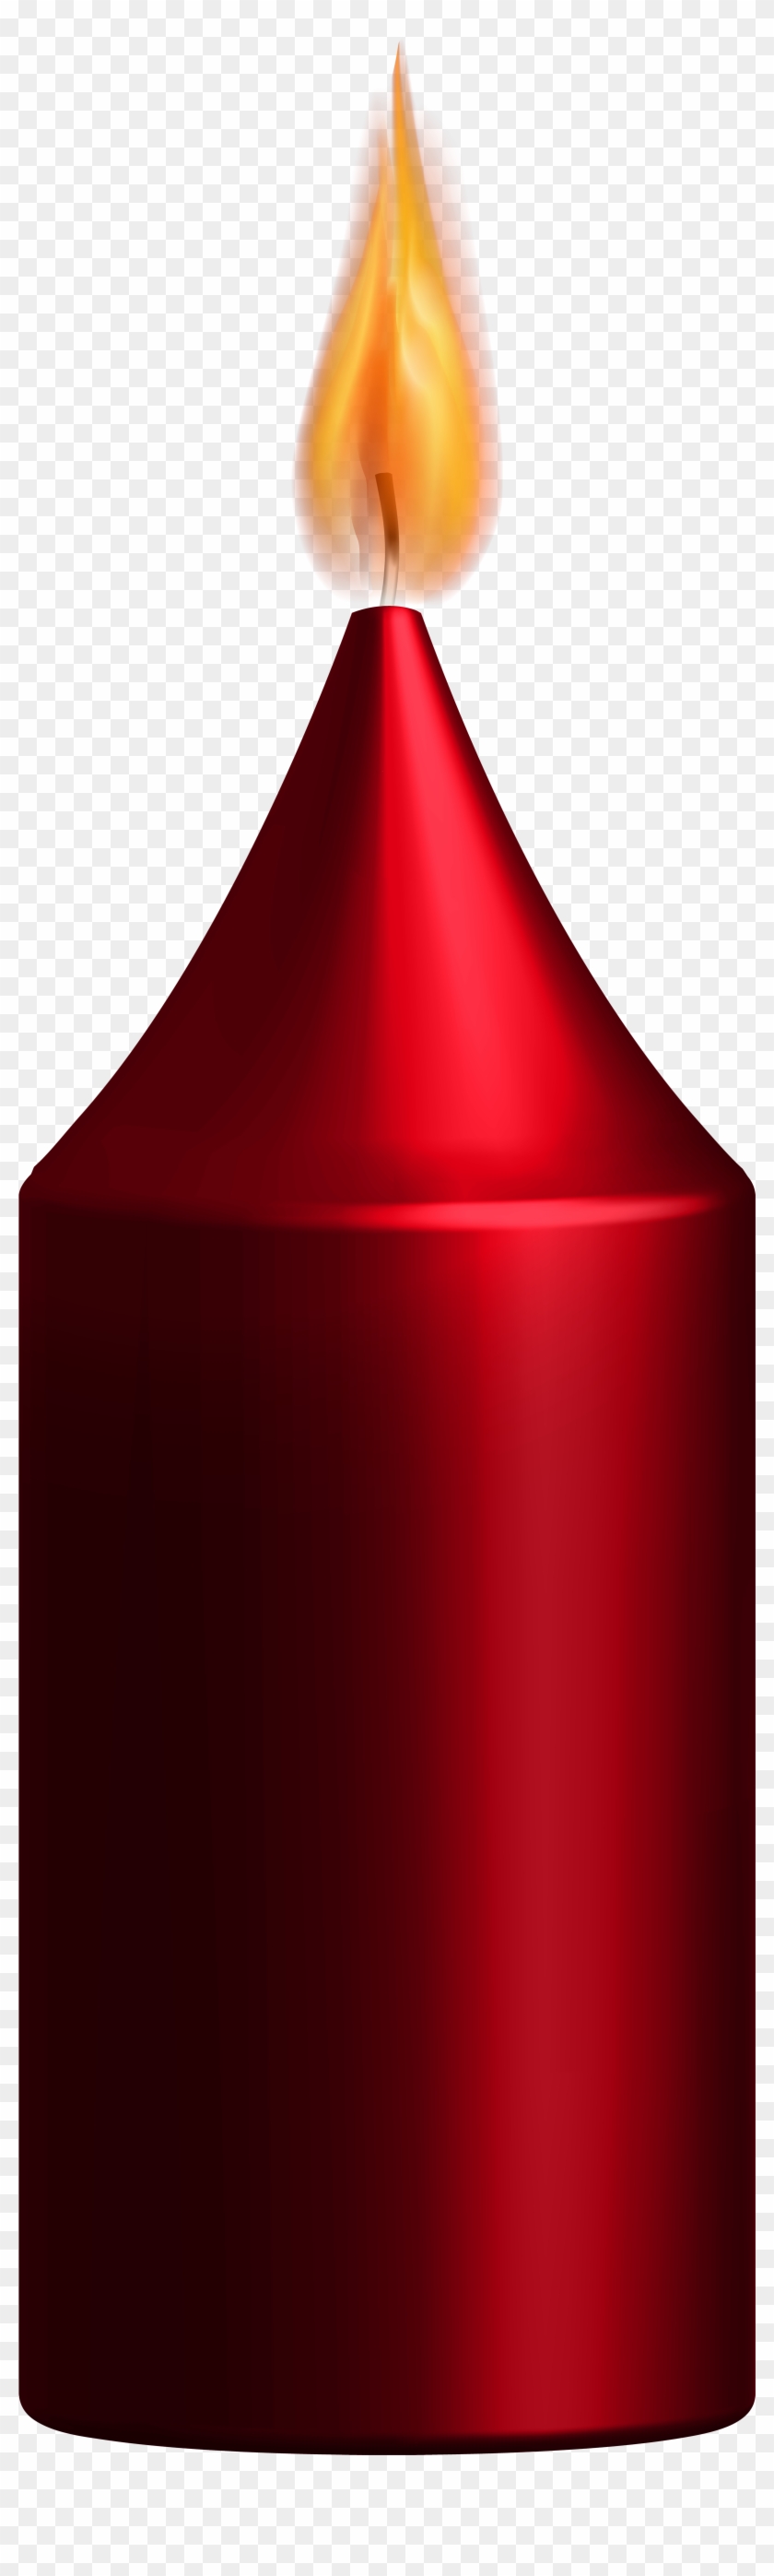 Red Candle Png Clip Art - Red Candle Clipart #423076